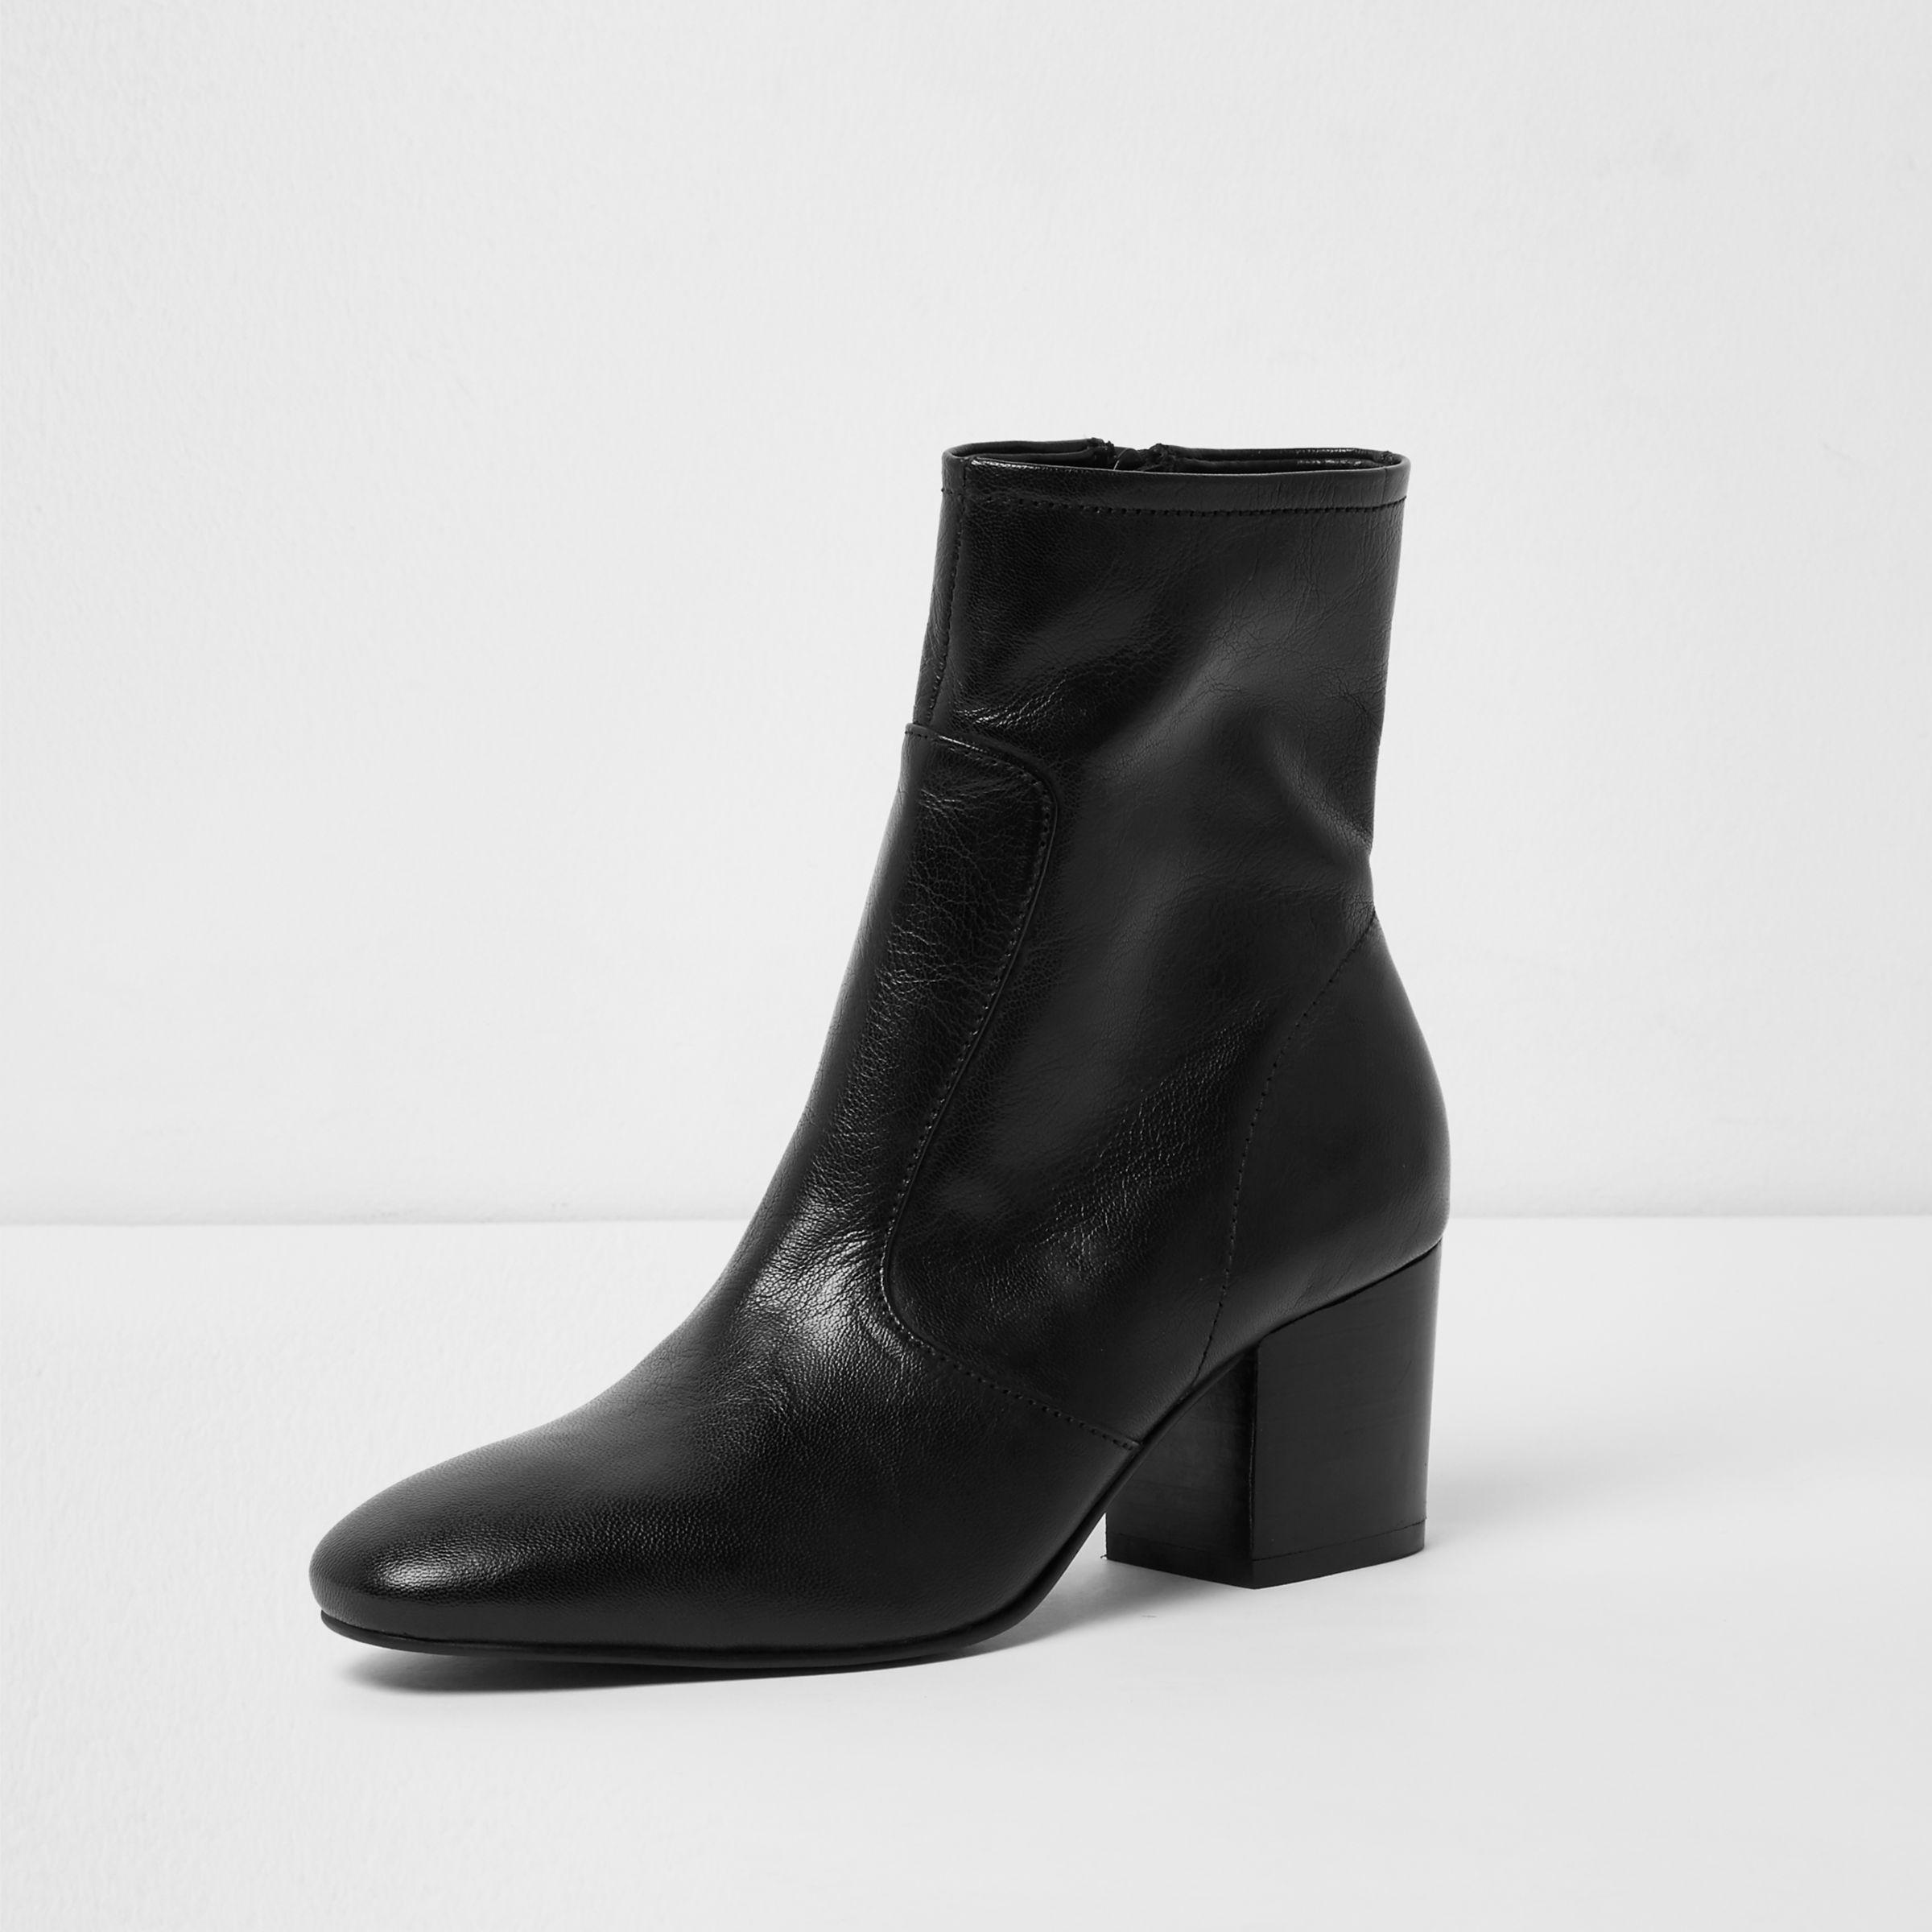 black leather sock ankle boots,Free delivery,www.workscom.com.br